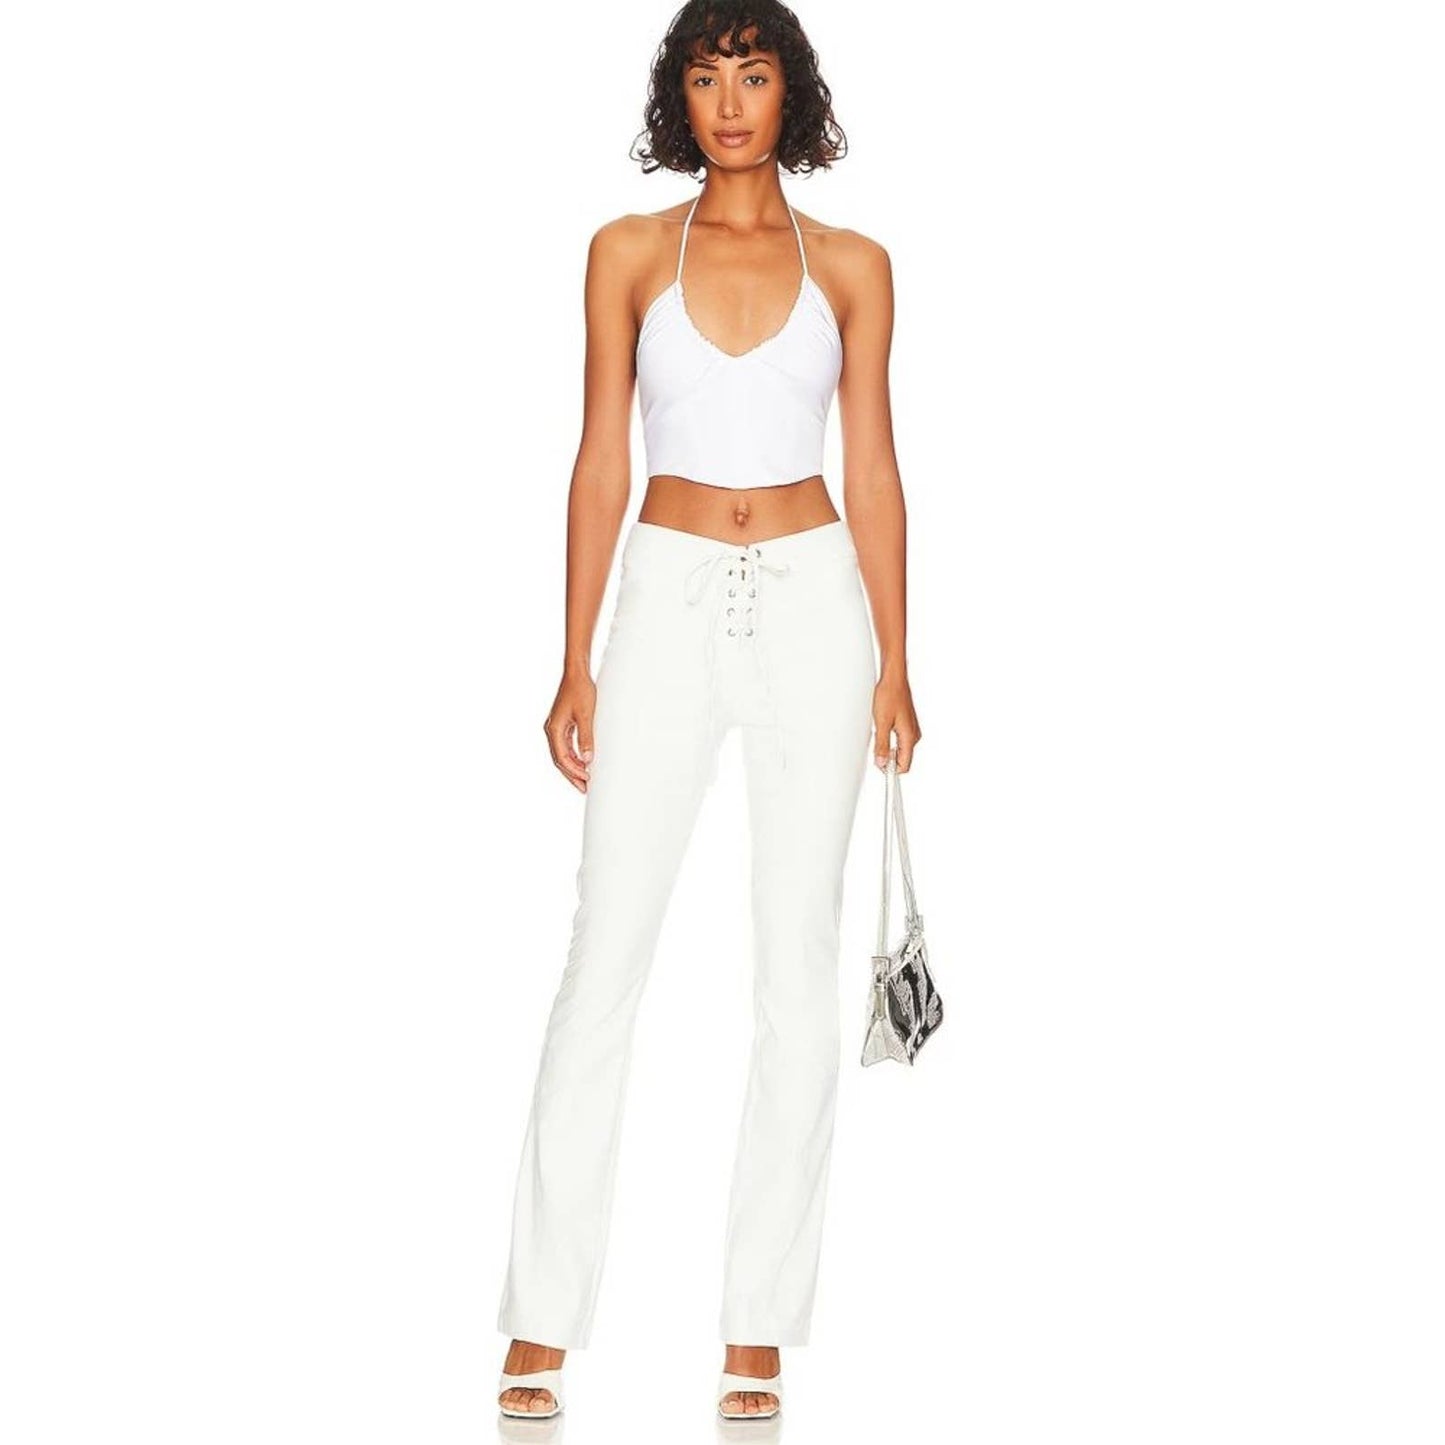 Revolve h:ours Annalise Pant in Ivory NWOT Size XS